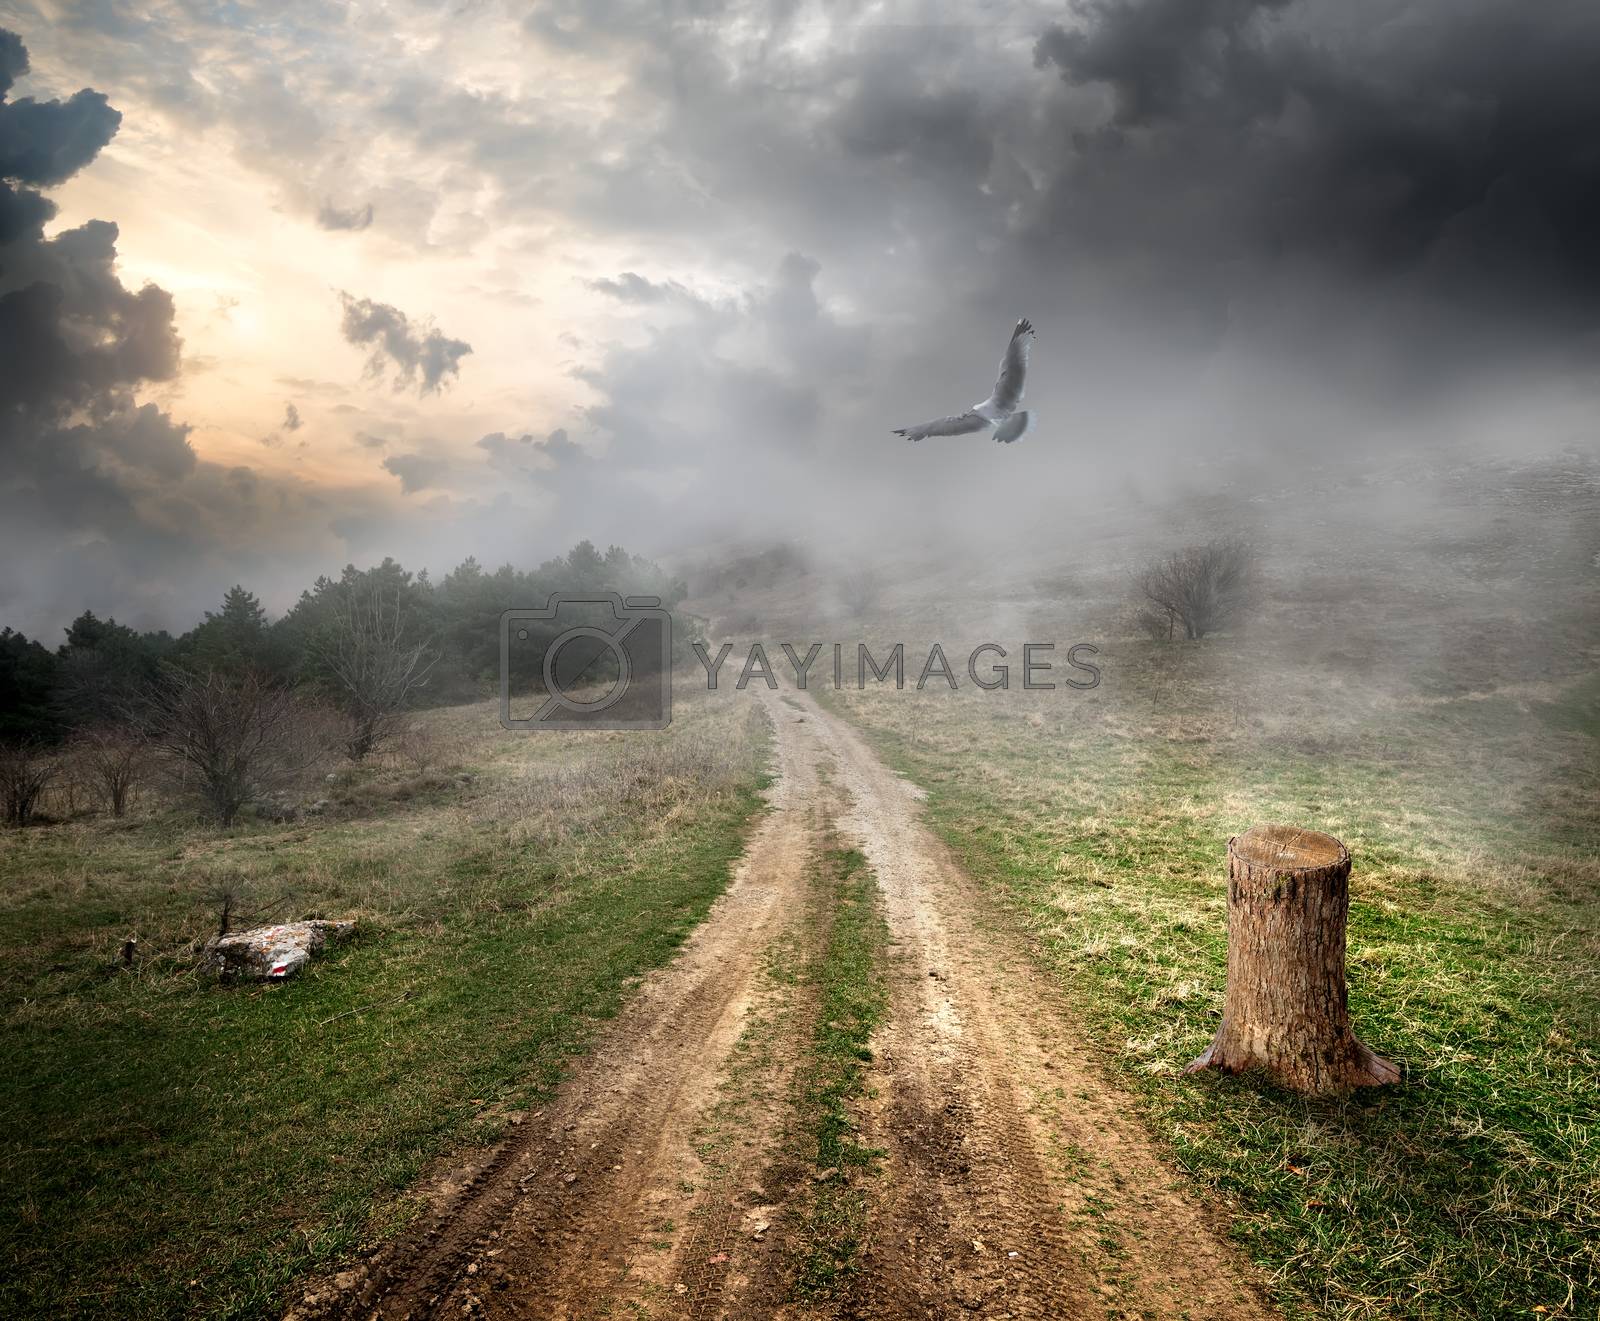 Royalty free image of Bird over country road by Givaga